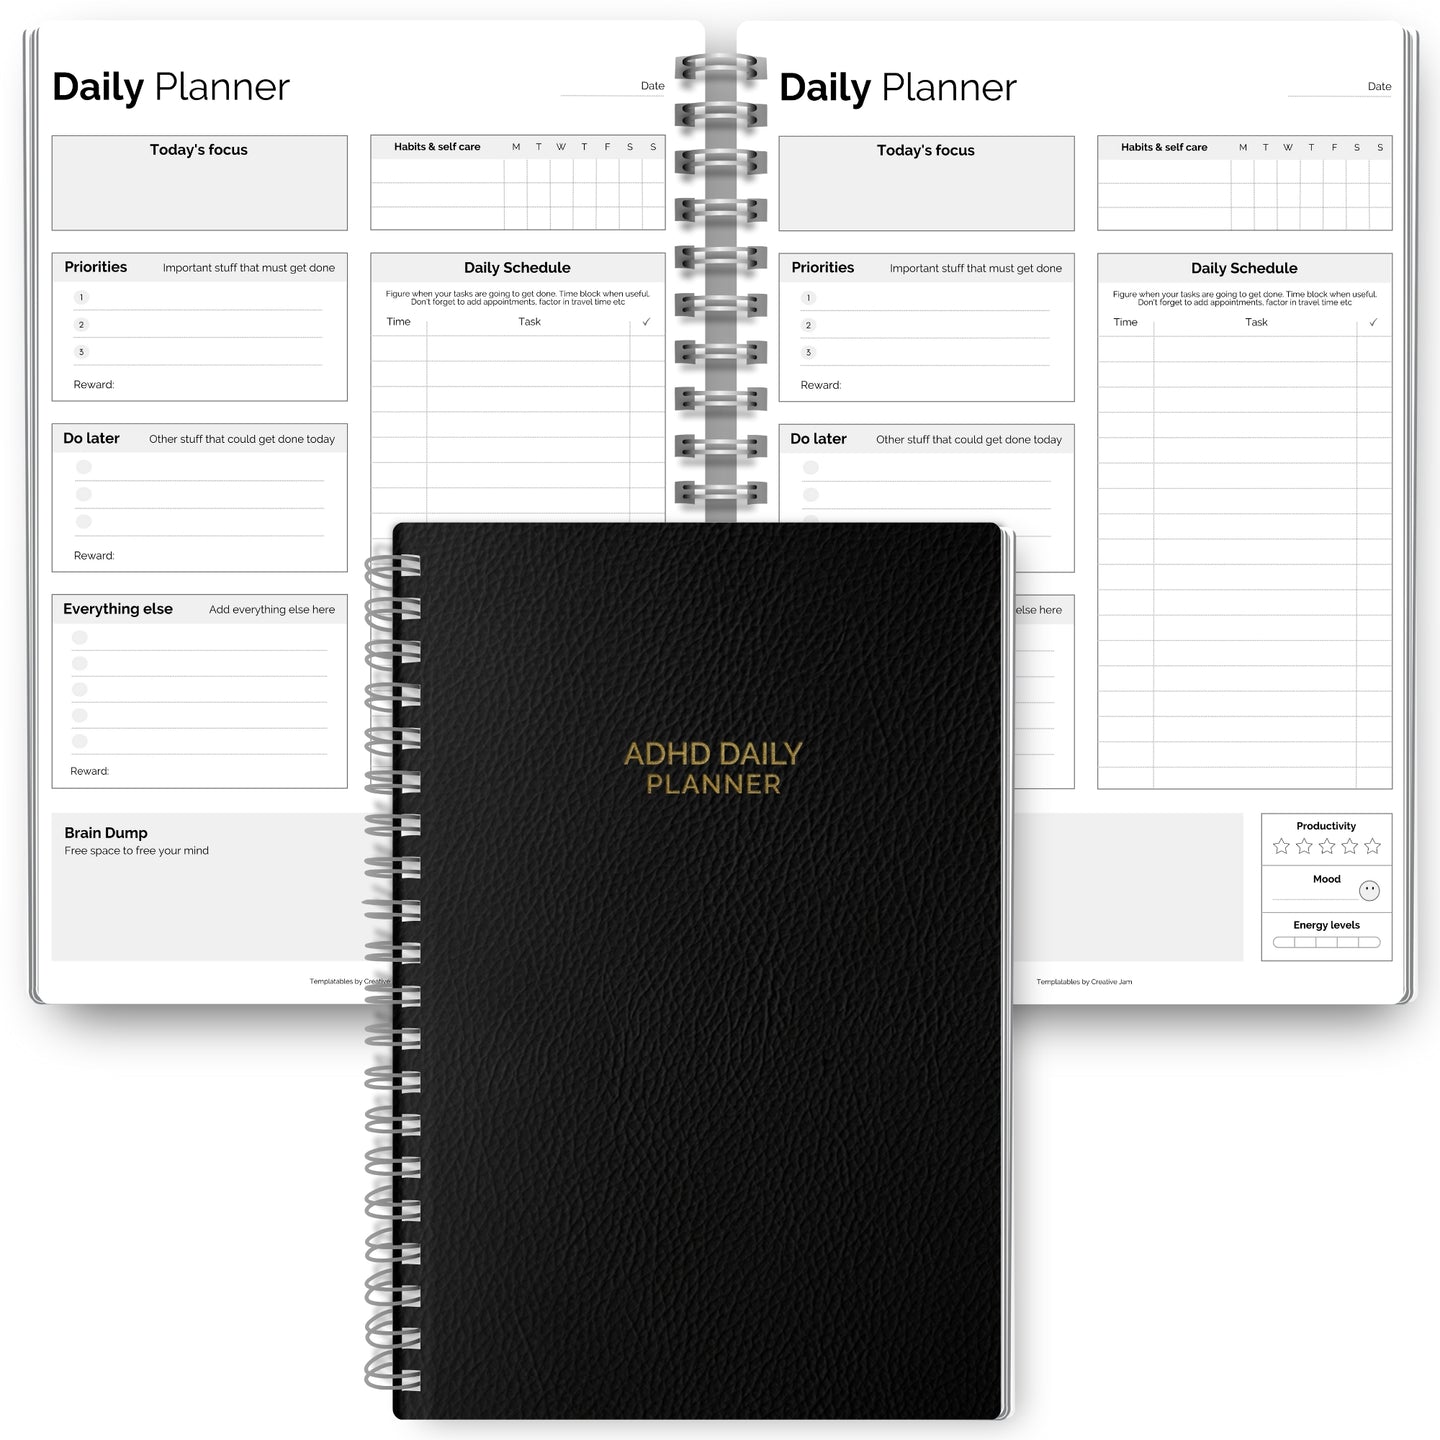 ADHD Daily Planner for Neurodivergent Adults - Productivity Daily Planner & Task Management to Stay Organized and Focused | A5 Mono